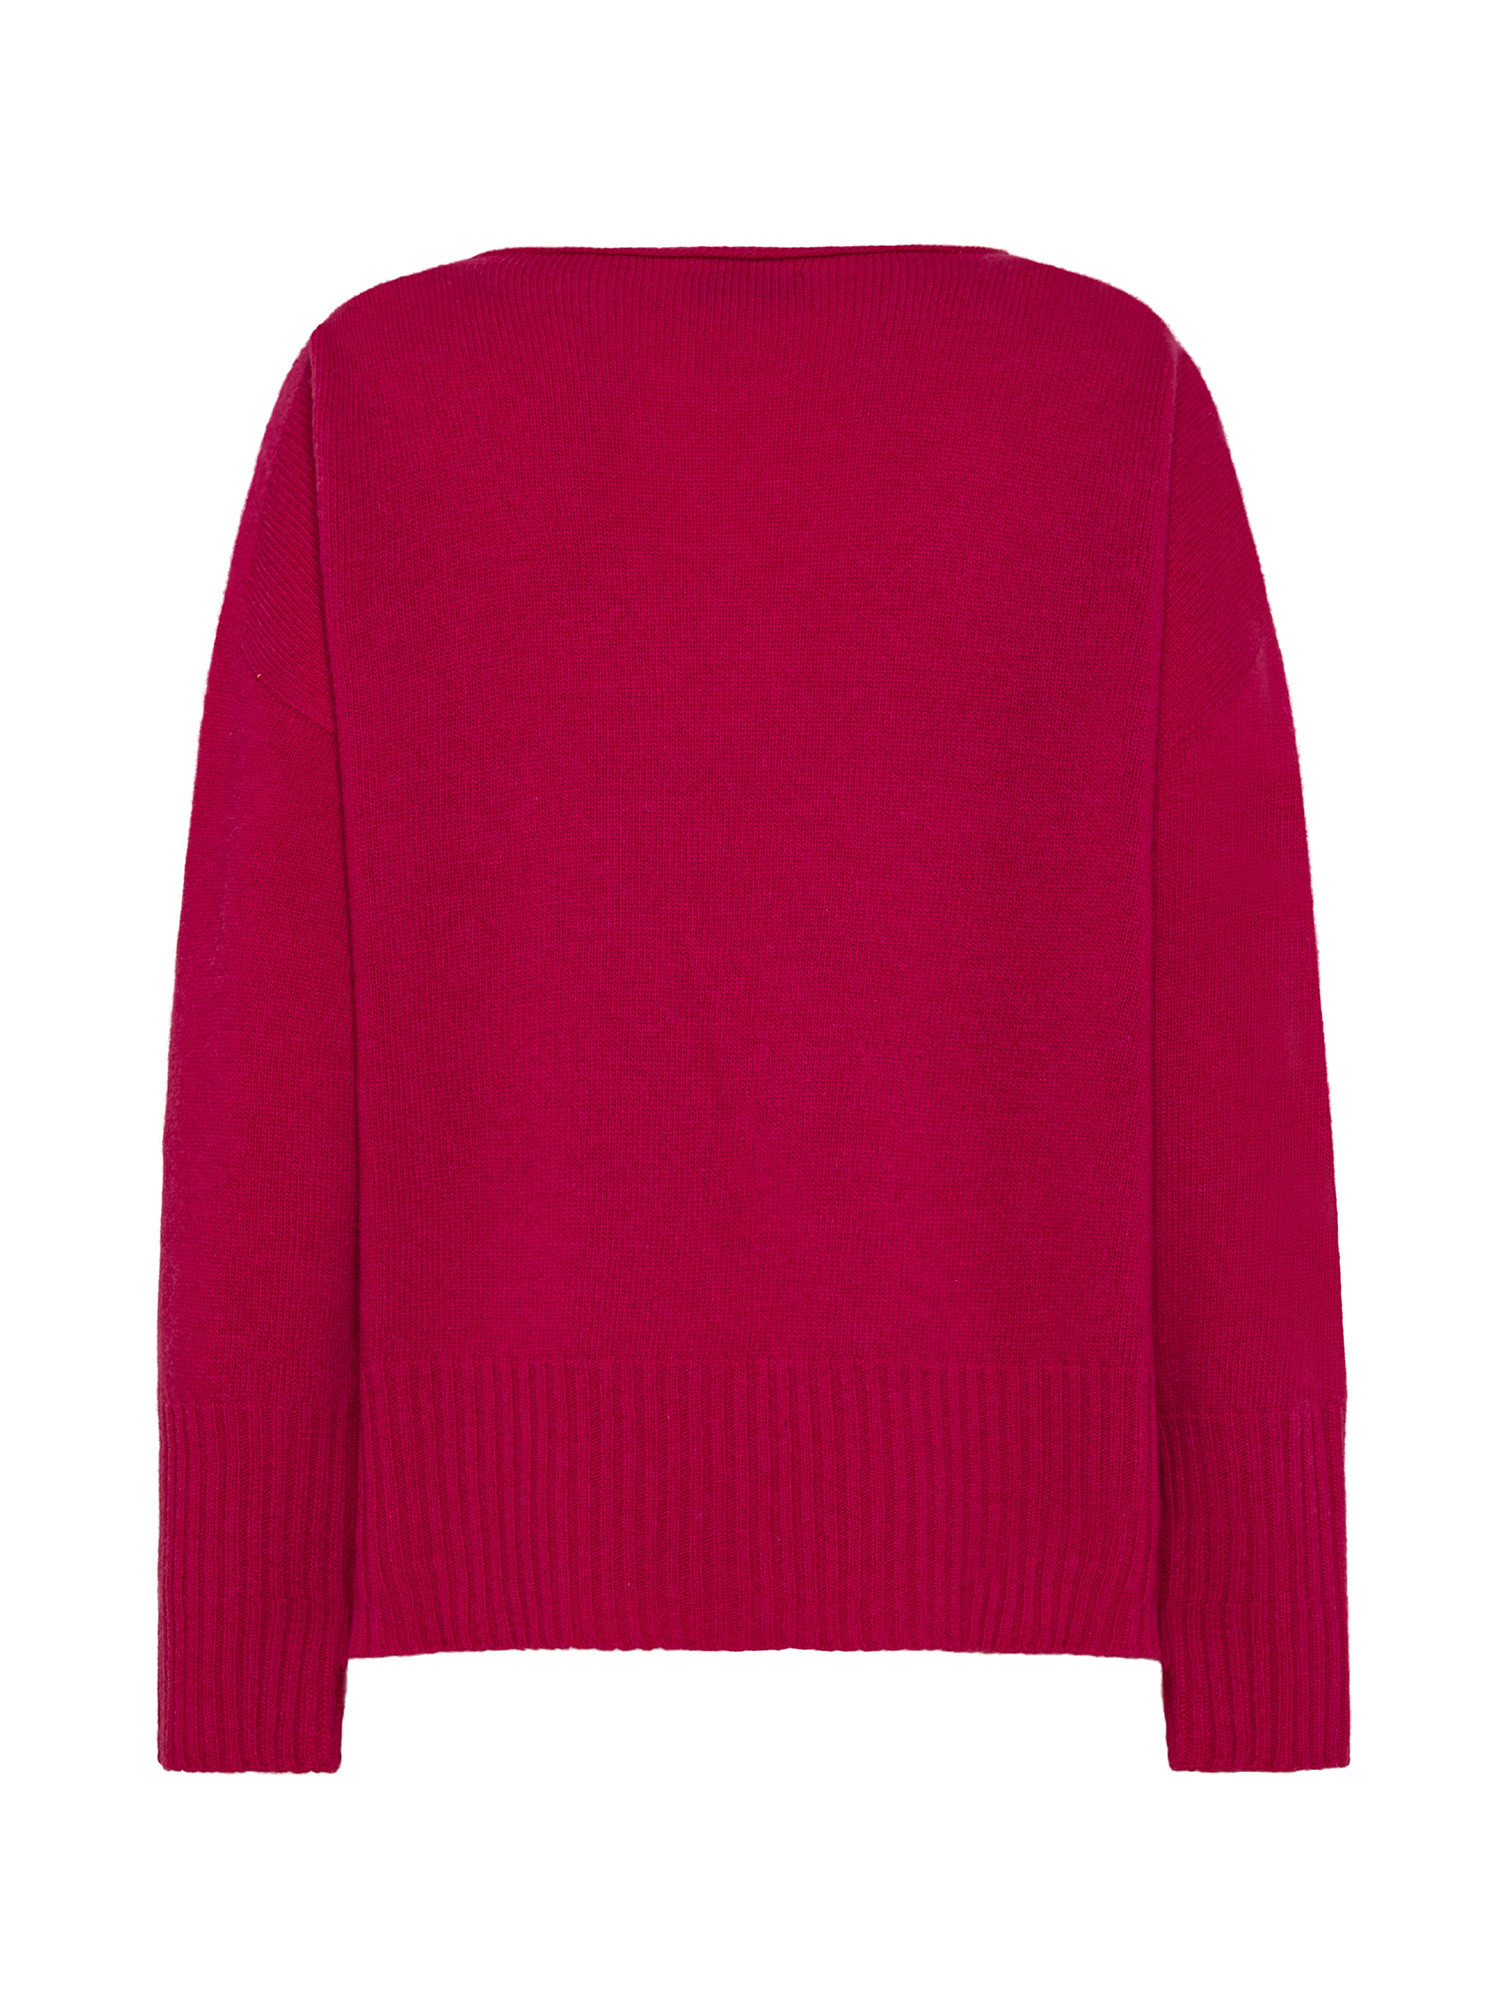 K Collection - Pullover in lana cardata, Rosa fuxia, large image number 1